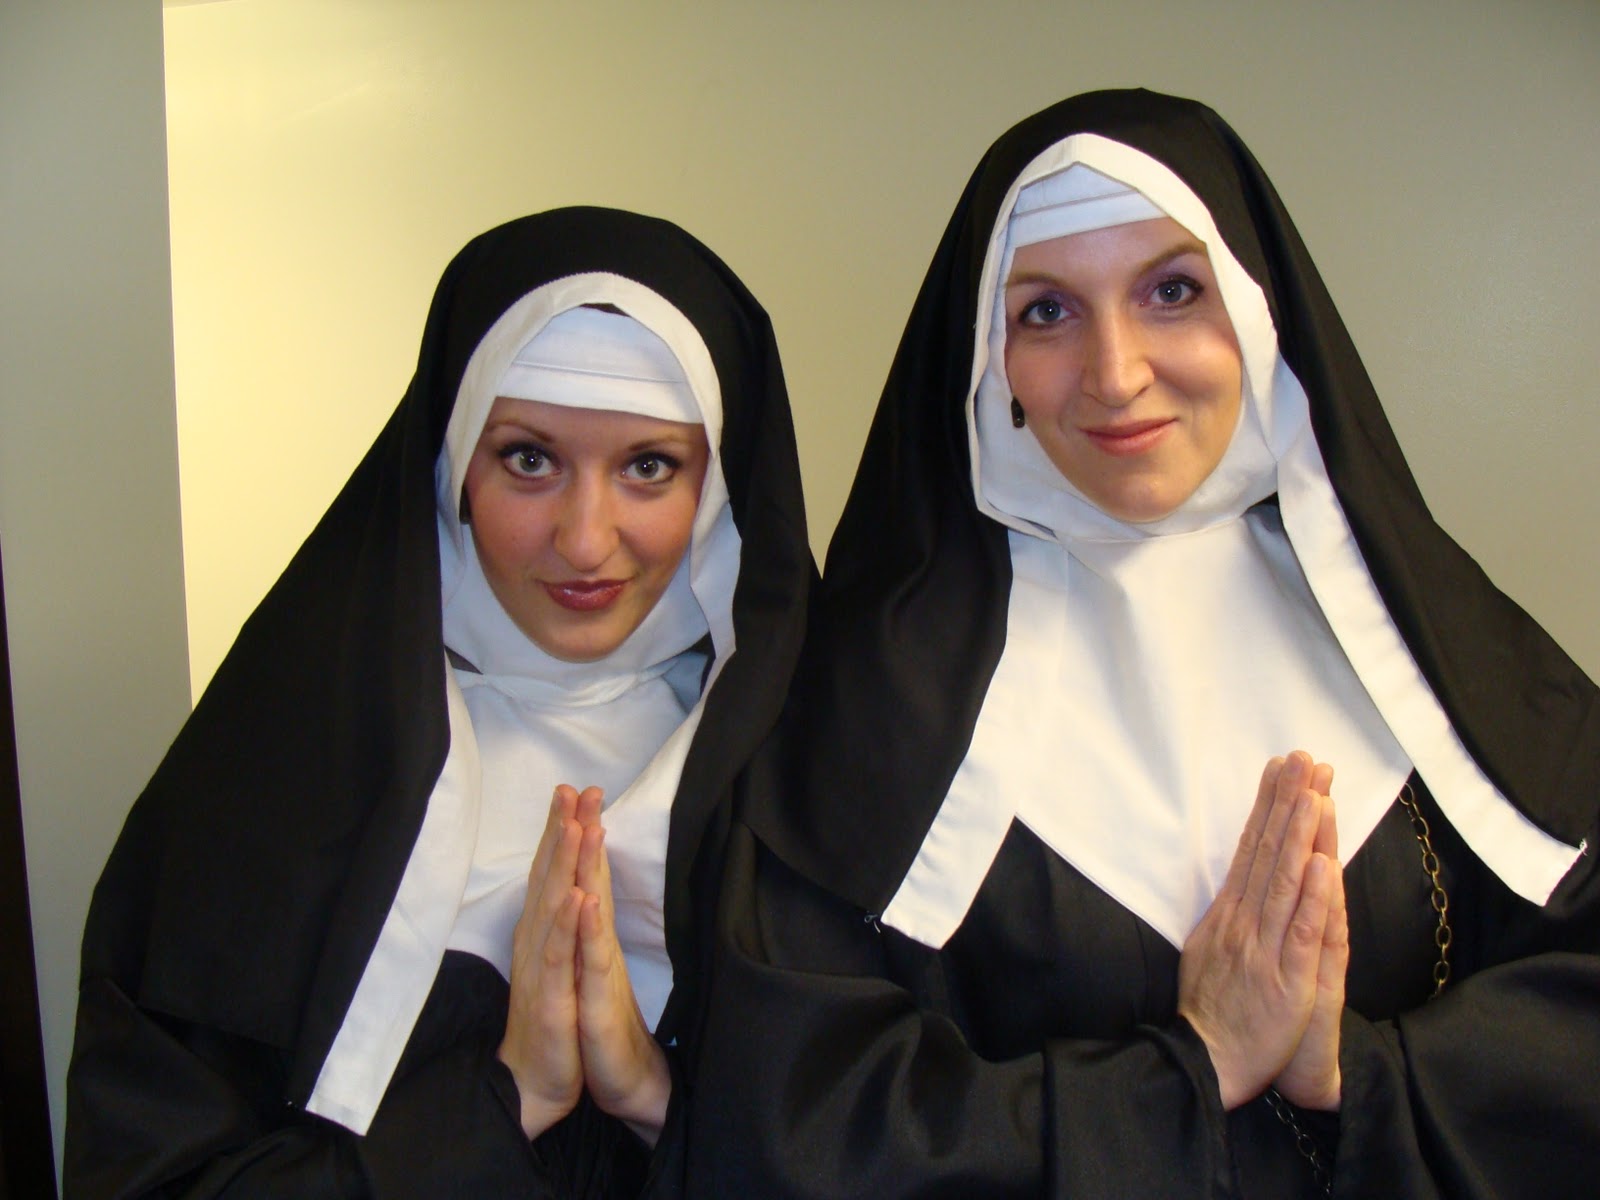 Sinful nuns enjoy foot fisting each other's nasty hairy cunts in convent